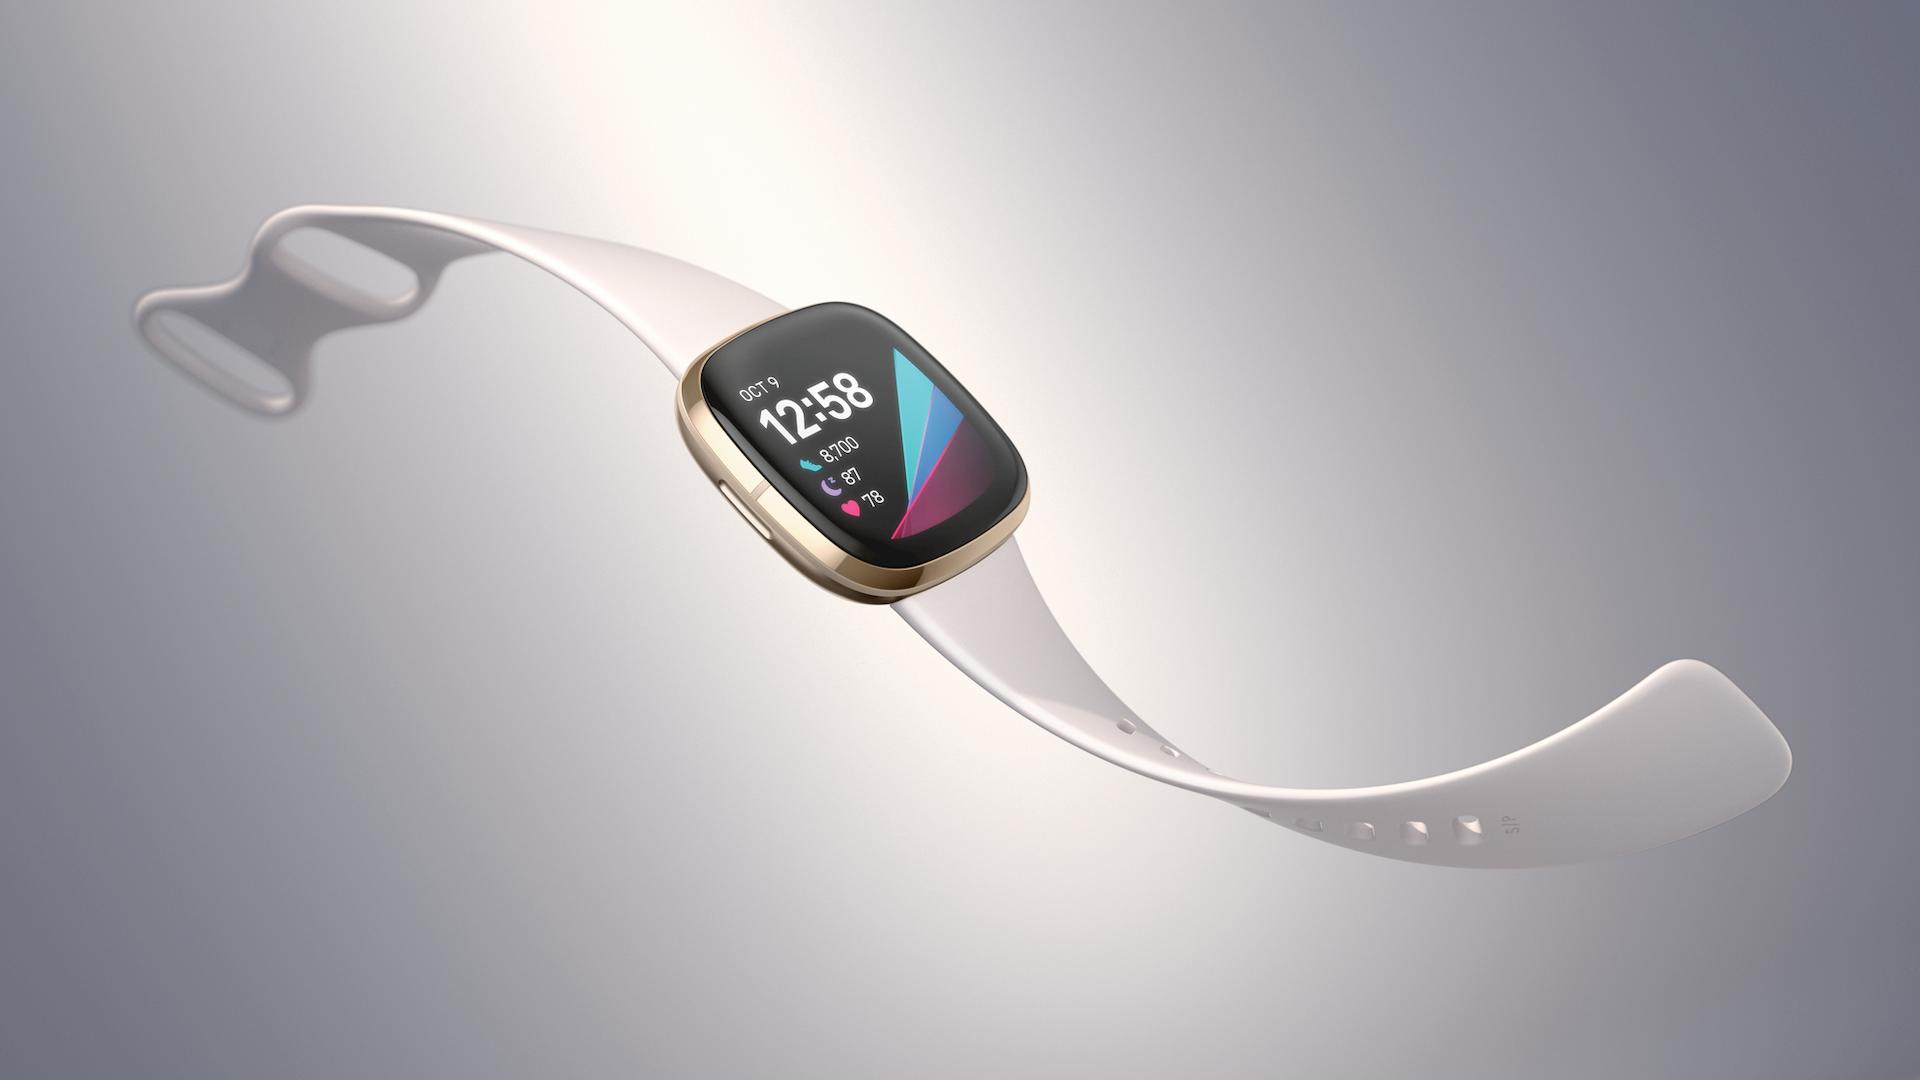 Drie nieuwe Fitbit-smartwatches onthuld